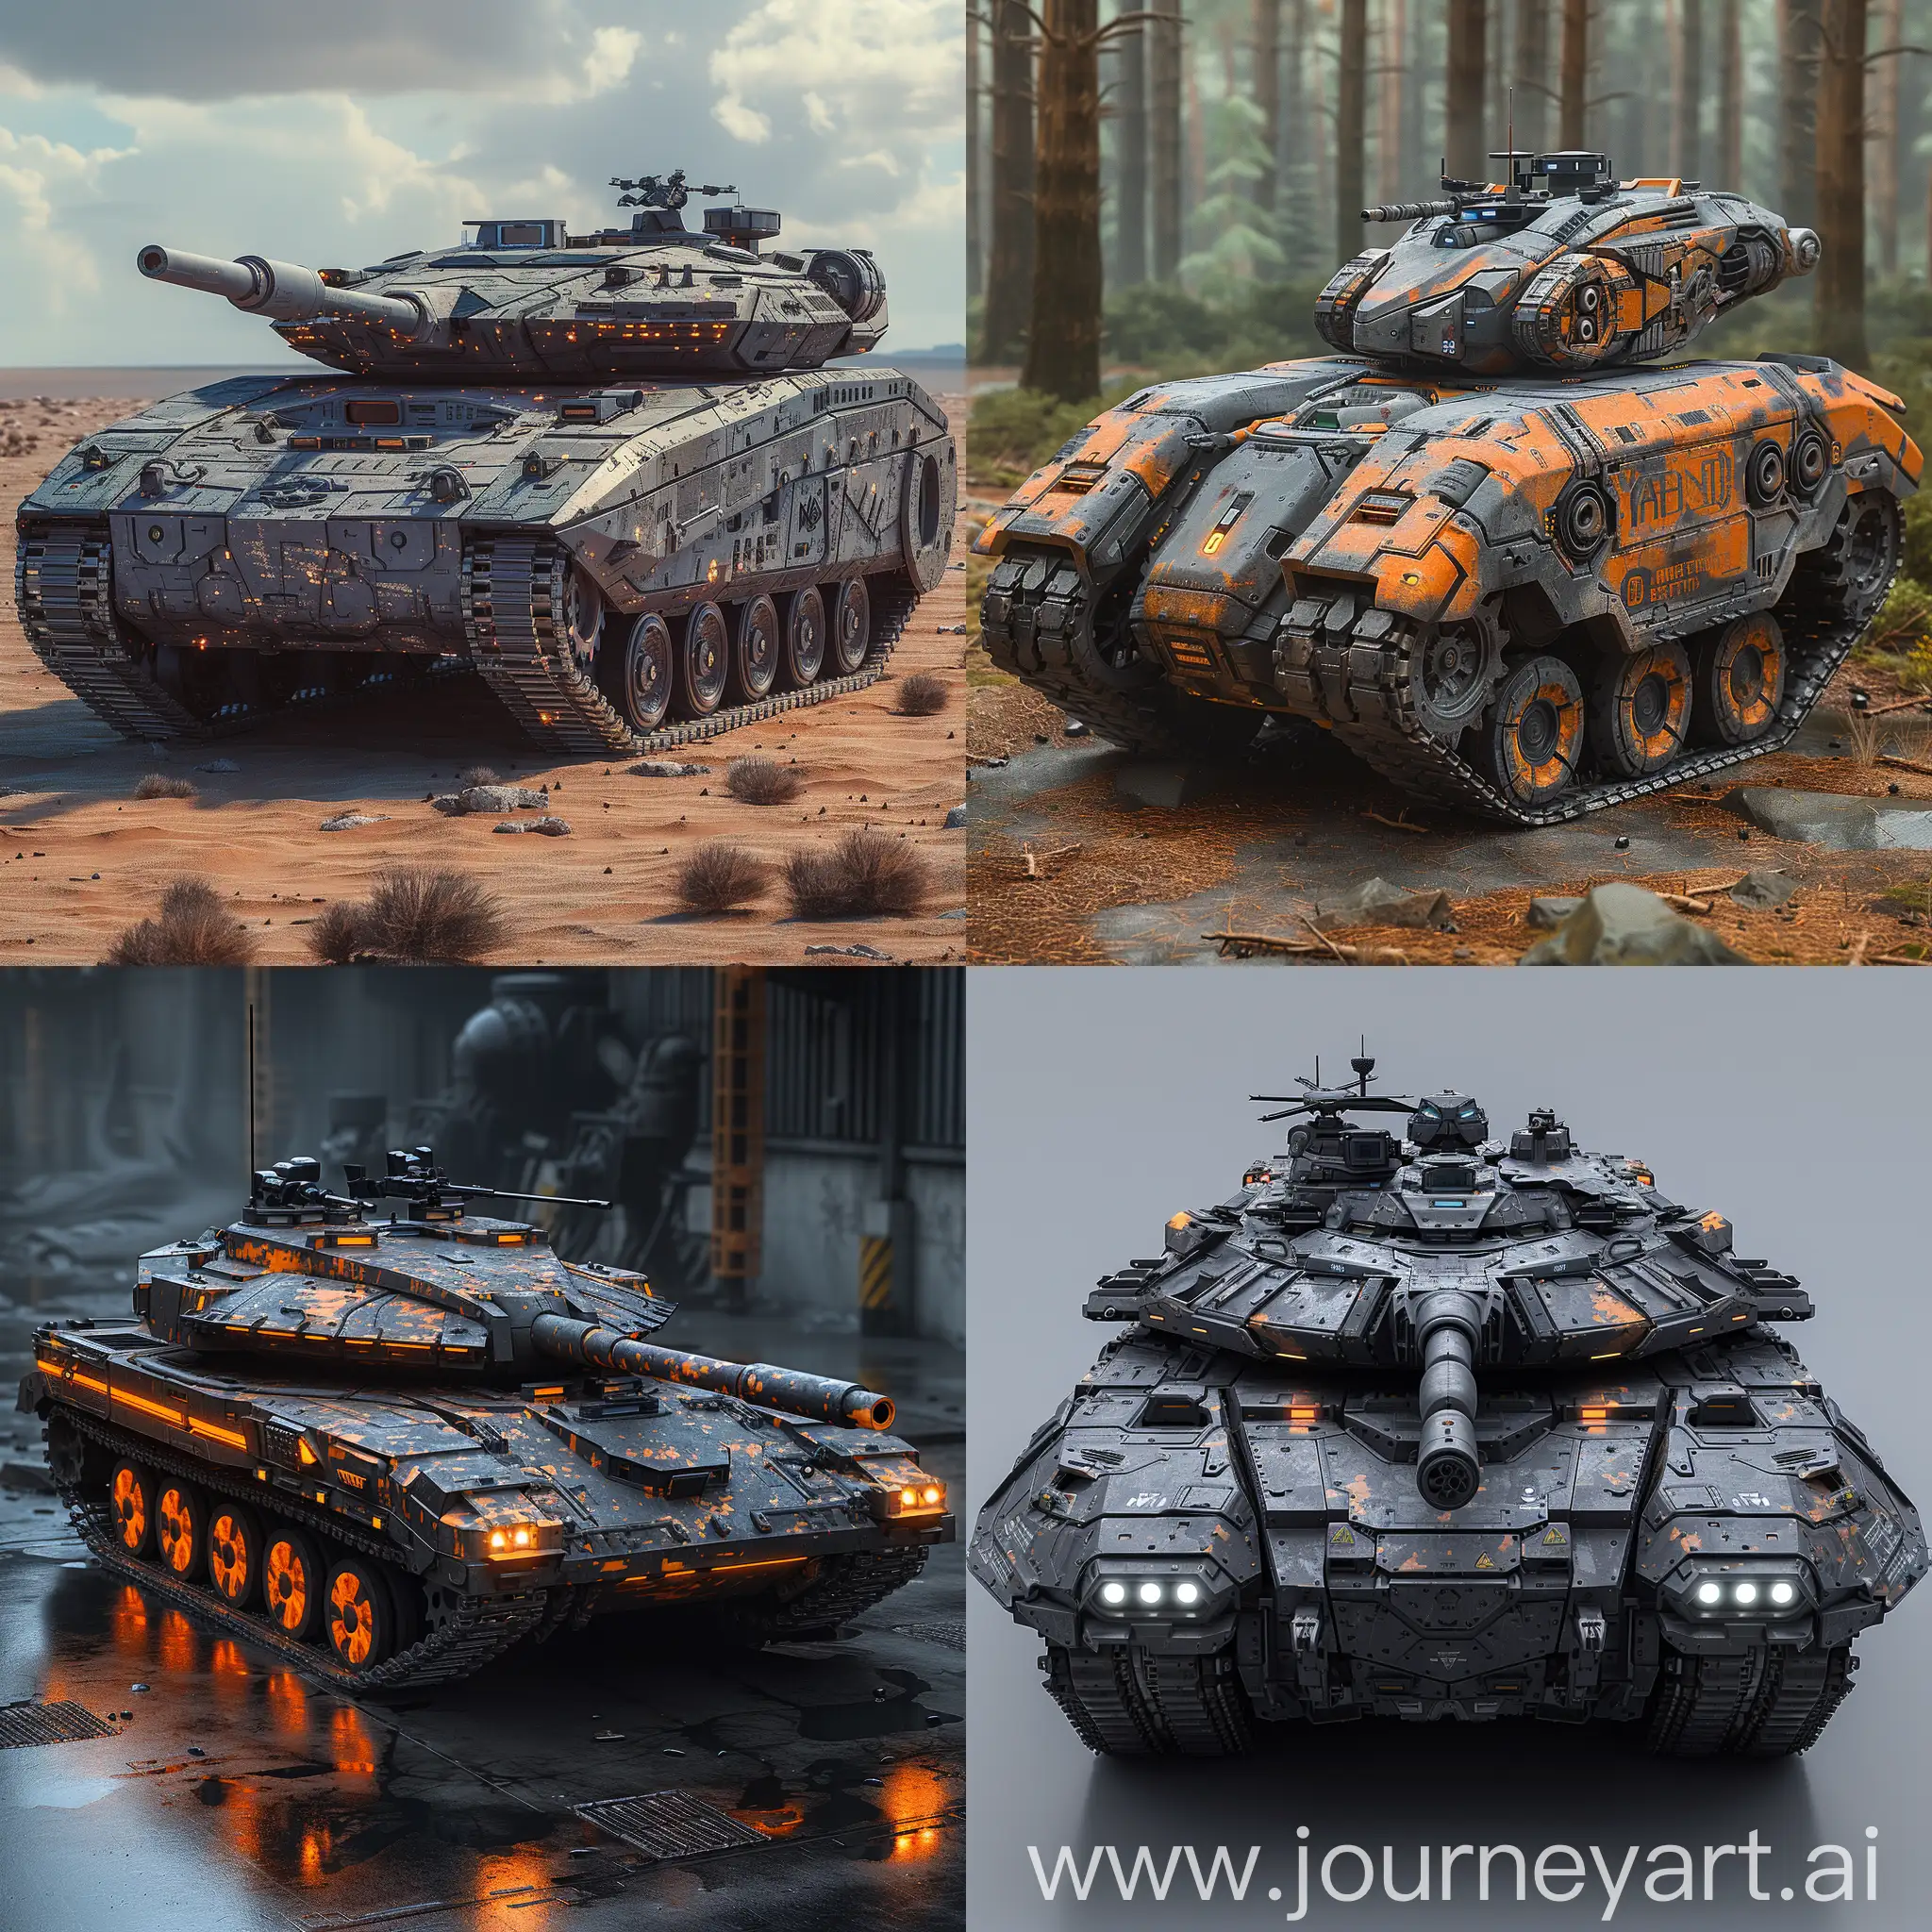 Futuristic tank, in futuristic style, Advanced AI-Driven Combat Systems, Modular Energy Systems, Adaptive Camouflage and Stealth Technology, Smart Armor, Integrated Electronic Warfare Suite, Augmented Reality (AR) Systems, Autonomous Repair and Maintenance Drones, Advanced Sensor Fusion, Enhanced Communication Systems, Human-Machine Interface (HMI), Active Protection Systems (APS), Adaptive Camouflage, Hybrid-Electric Drive, 360-Degree Situational Awareness, Drones and UAV Launch Systems, Enhanced Mobility Systems, Modular Armor Panels, Energy Weapons, Self-Healing Materials, Robotic Support Systems, Augmented Reality (AR) Cockpit, 360-Degree Surround Display System, Holographic Tactical Interface, Neural Interface Controlб Advanced Sound Systemб Smart Helmet and Wearable Tech, Adaptive Climate Control and Ergonomics, Voice-Activated Command Systems, Virtual Training and Simulation Mode, Real-Time Biometric Monitoring, Active Camouflage, Adaptive Armor, Modular Weapon Systems, Autonomous Drone Launch Pads, Advanced Sensor Array, Energy Shielding, Hybrid-Electric Propulsion, External Control Interfaces, Deployable Defensive Systems, Intelligent Terrain Adaptation, unreal engine 5 --stylize 1000